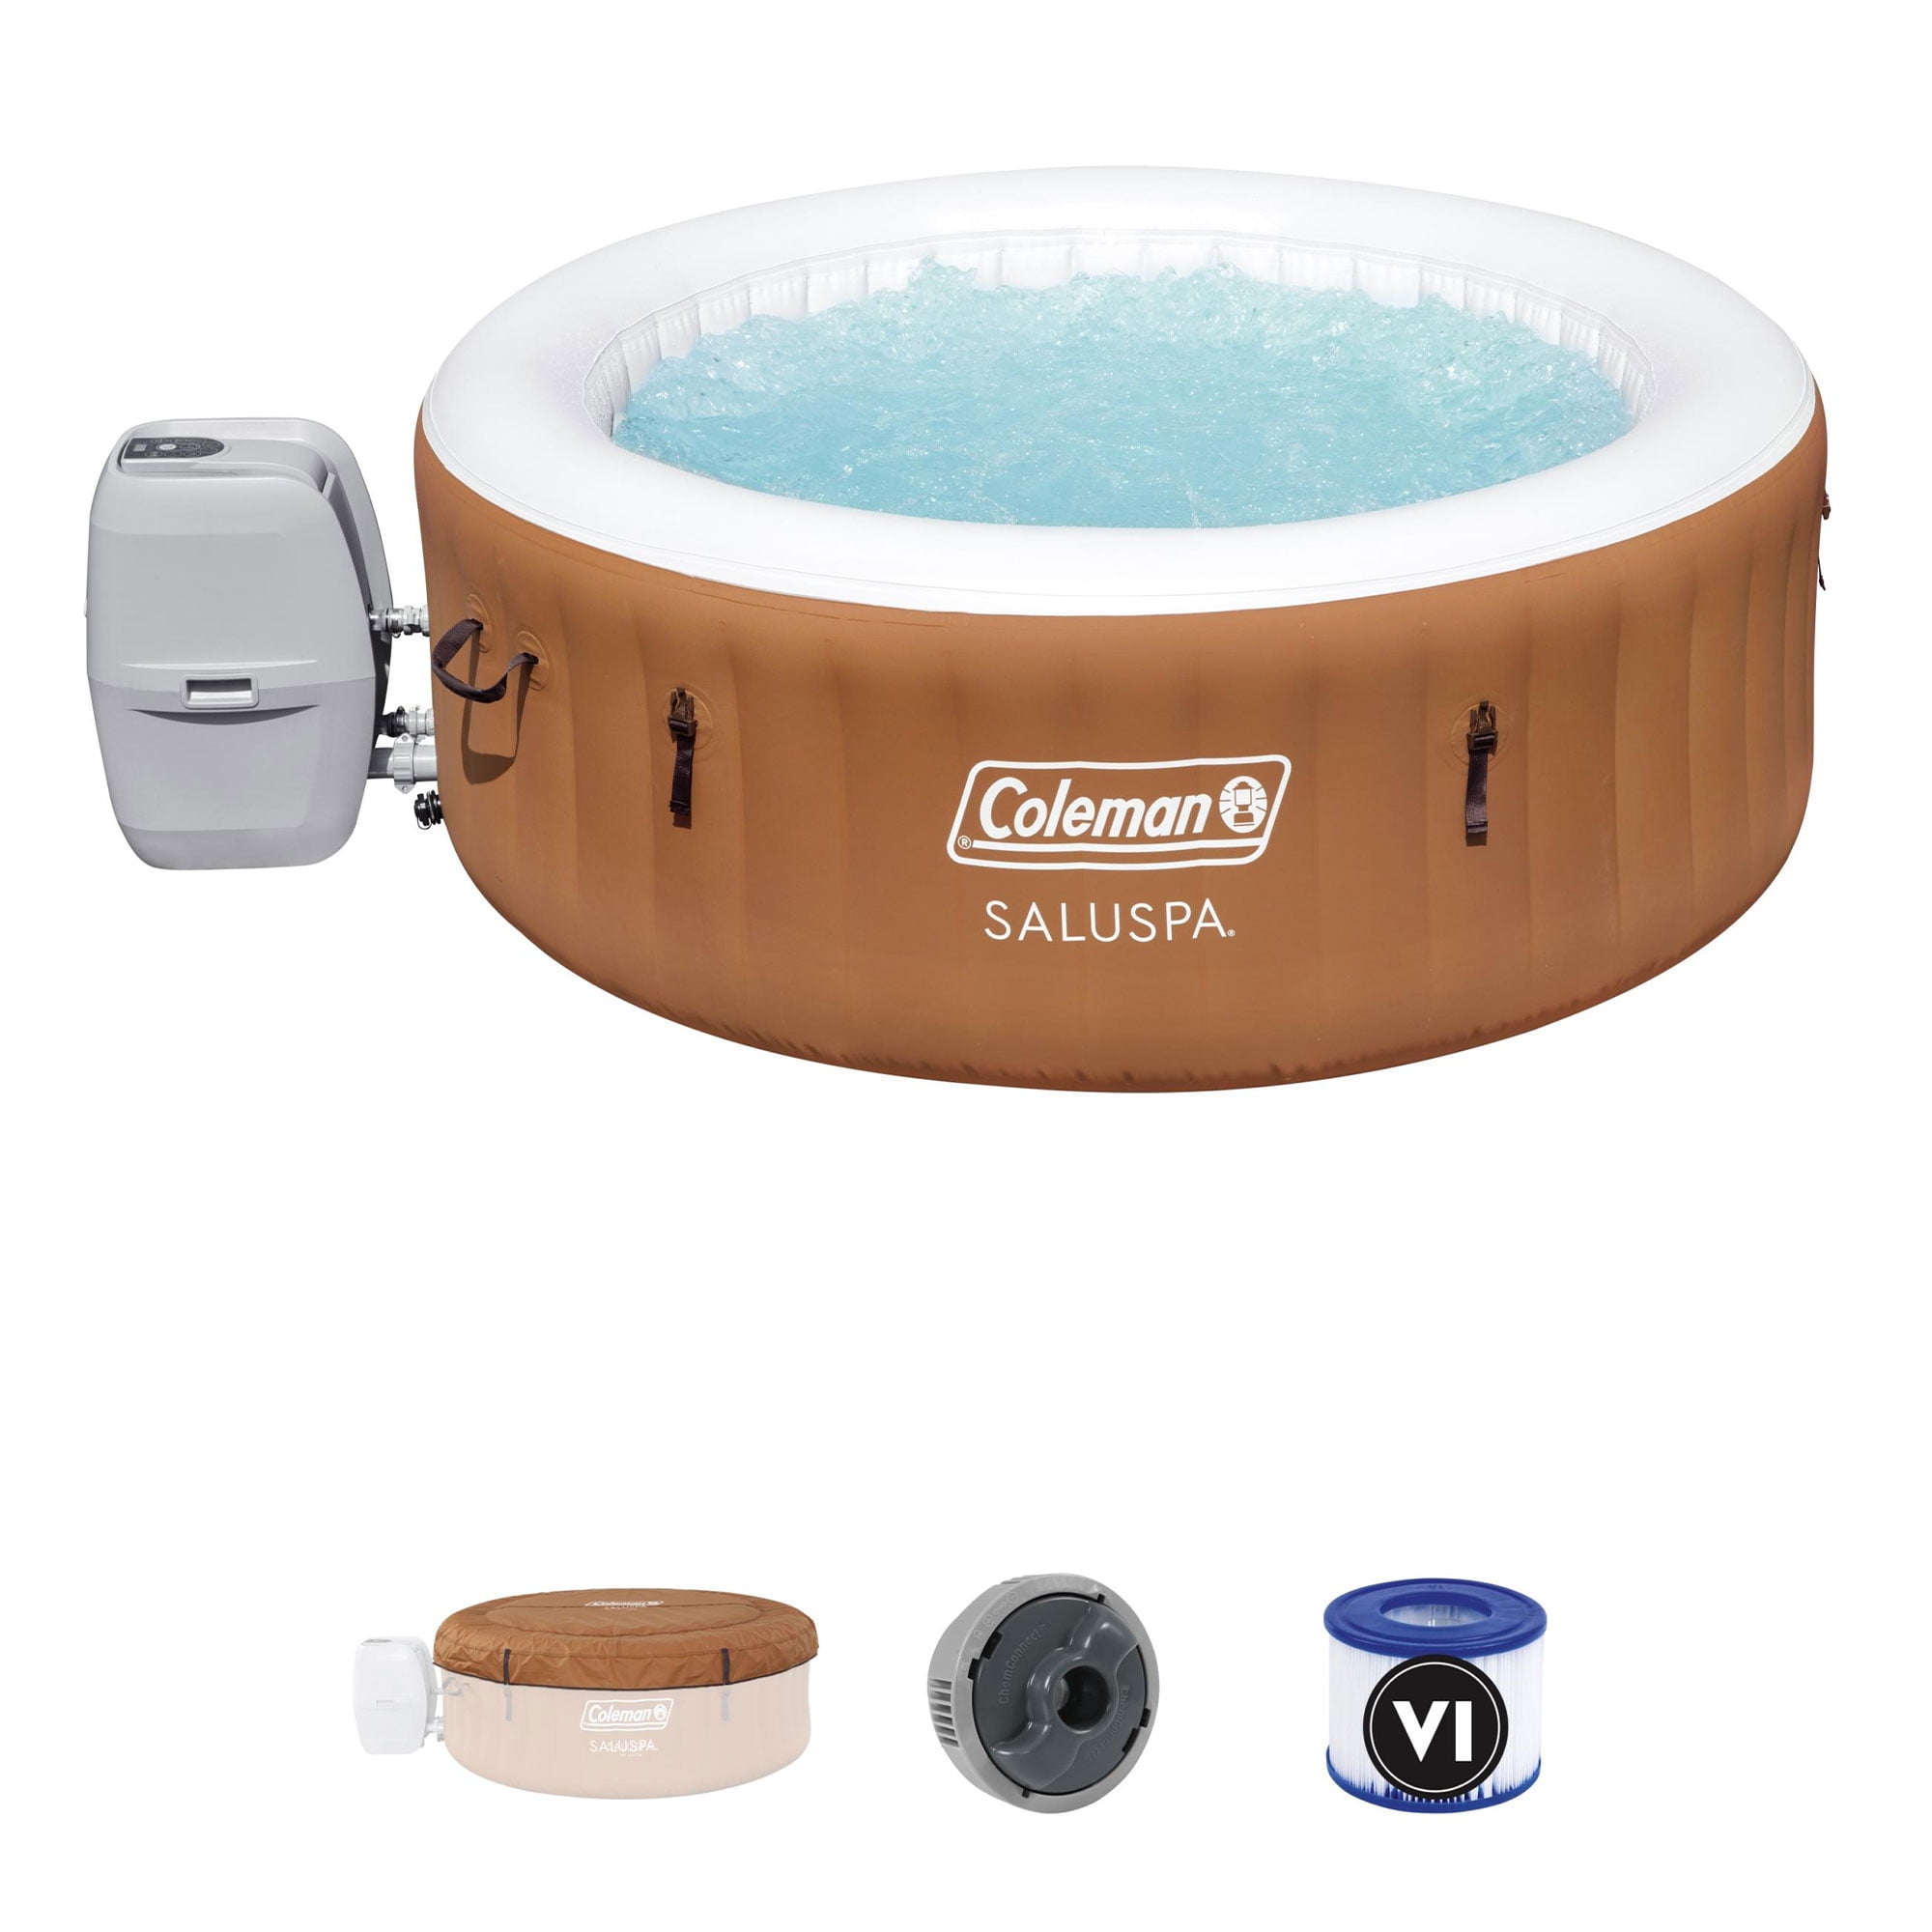 Gray CleverSpa Shades 800 Liter 70 inch 4 Person Portable Inflatable Hot Tub Outdoor Spa with Insulated Tub Cover and Filtration Kit Included 